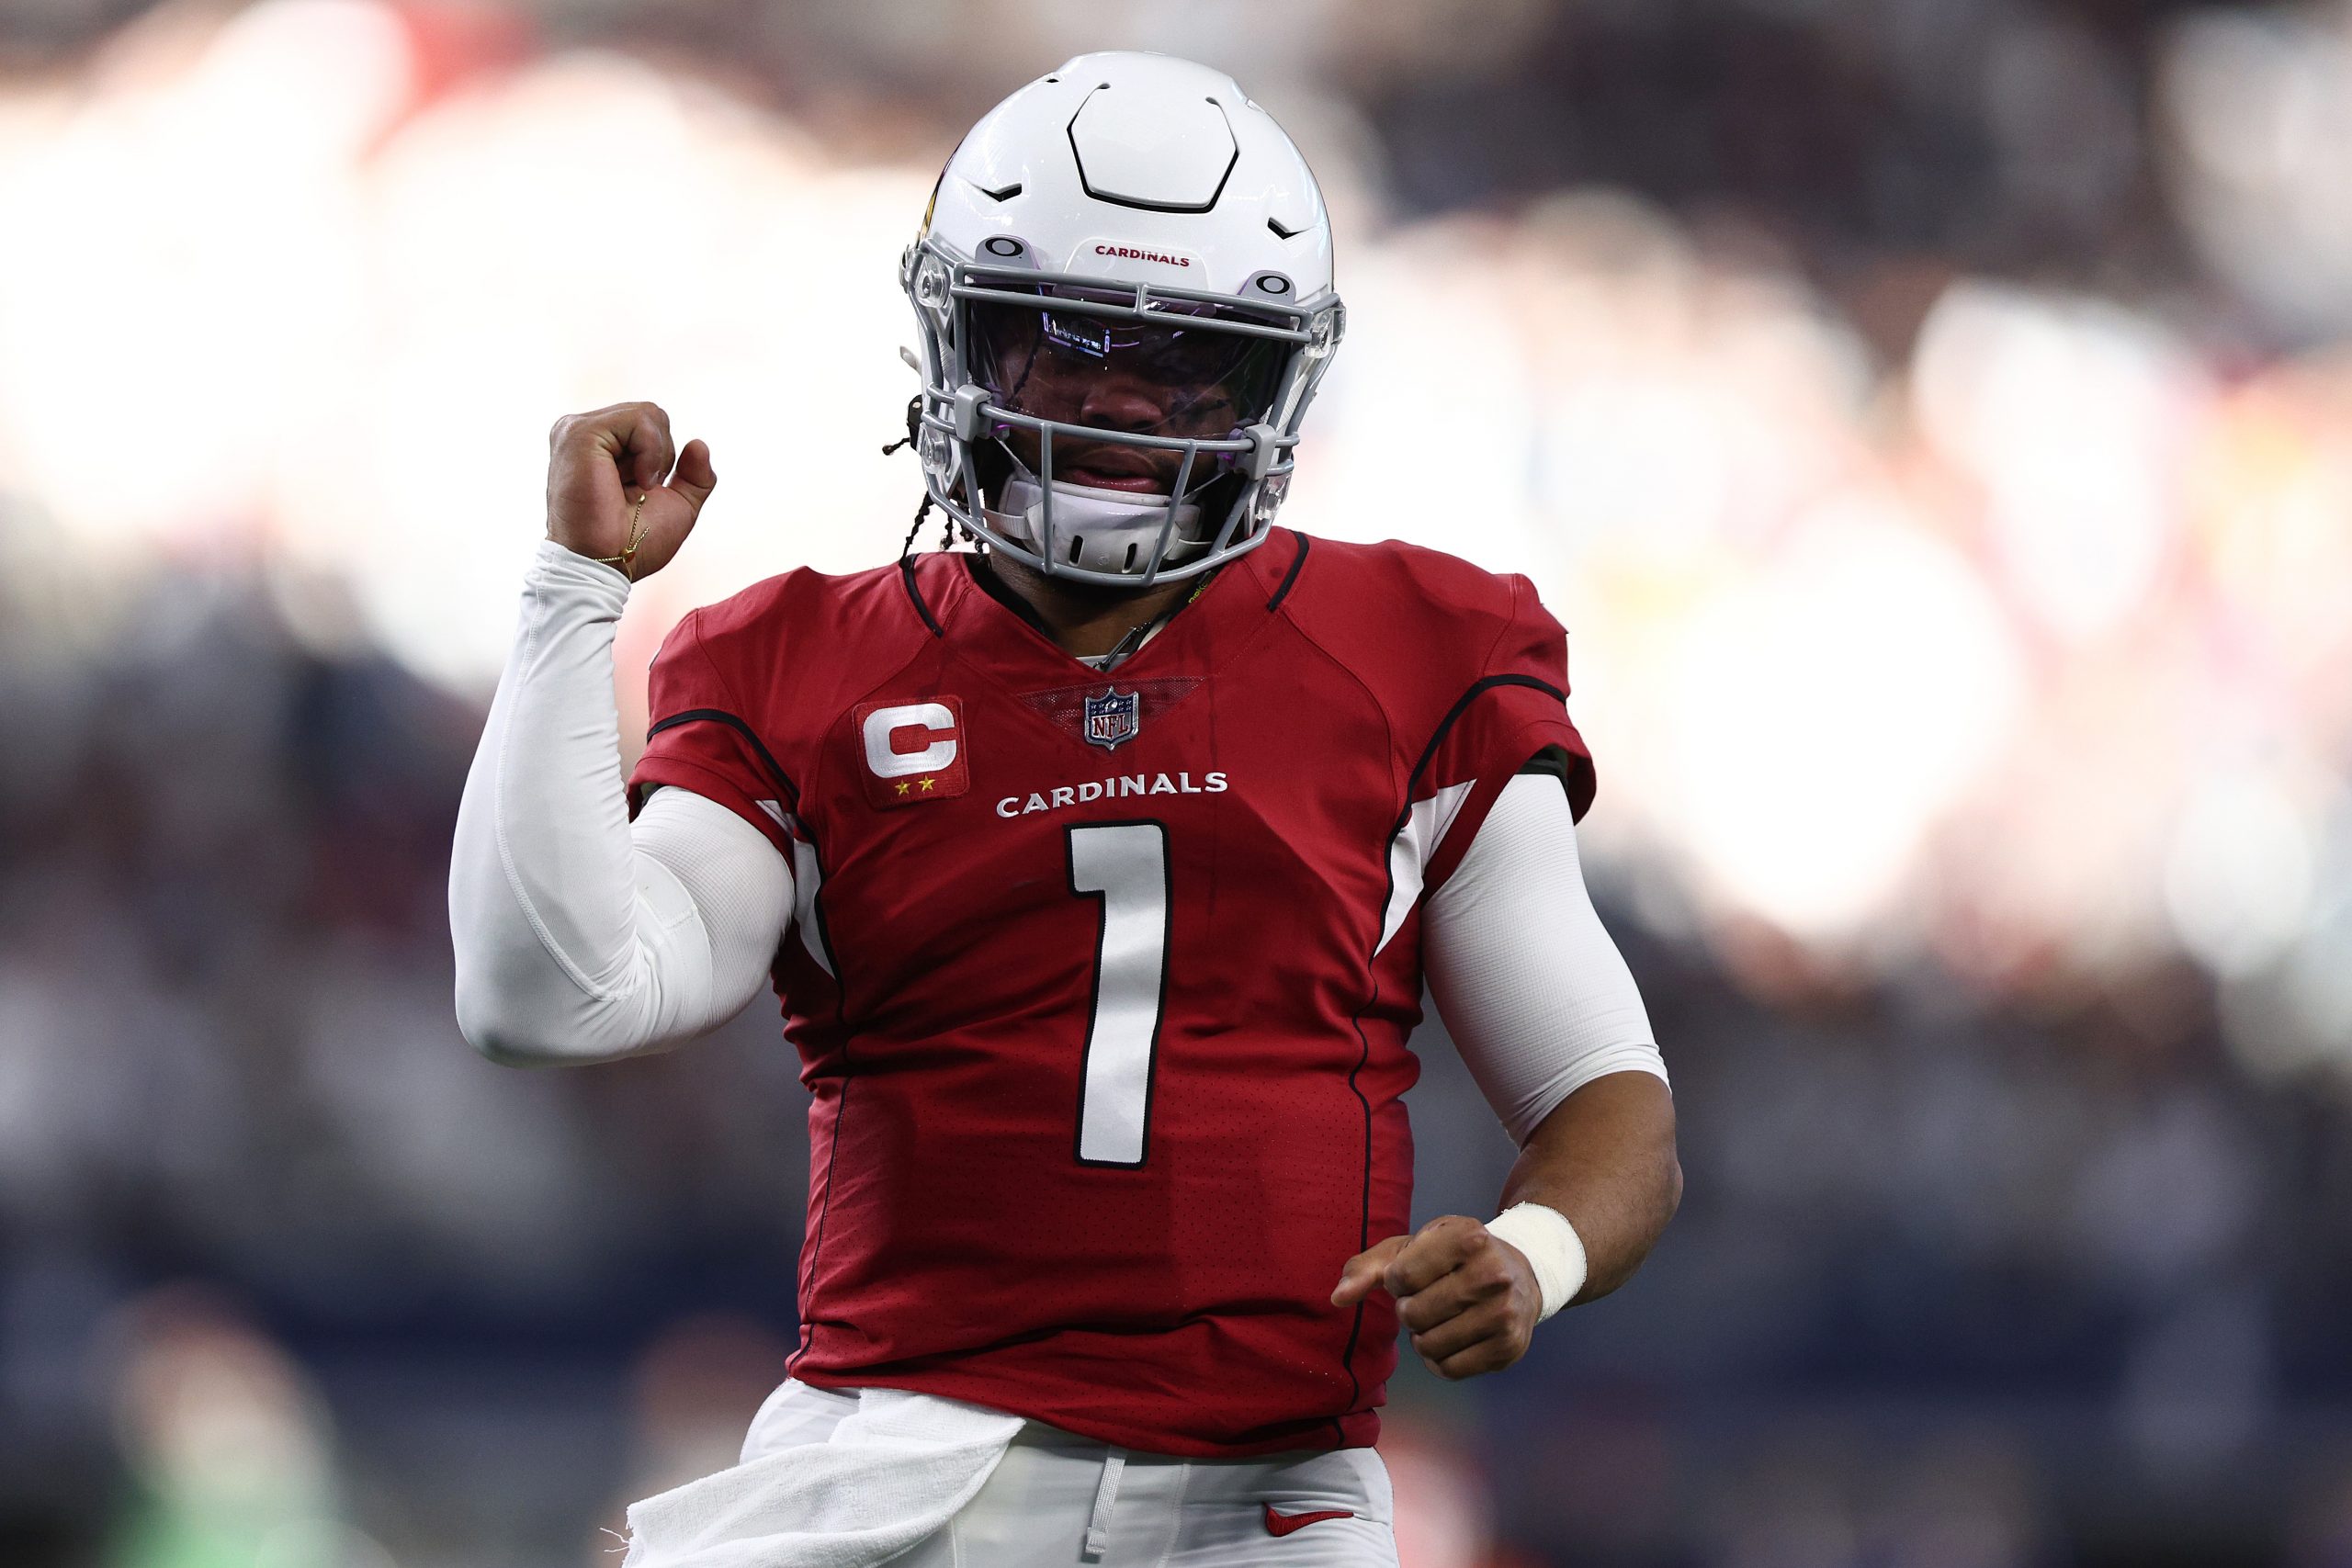 Kyler Murray Continues His Impressive Winning Streak at Jerry World With Bounce-Back Game Against the Cowboys: ‘I Can’t Lose’